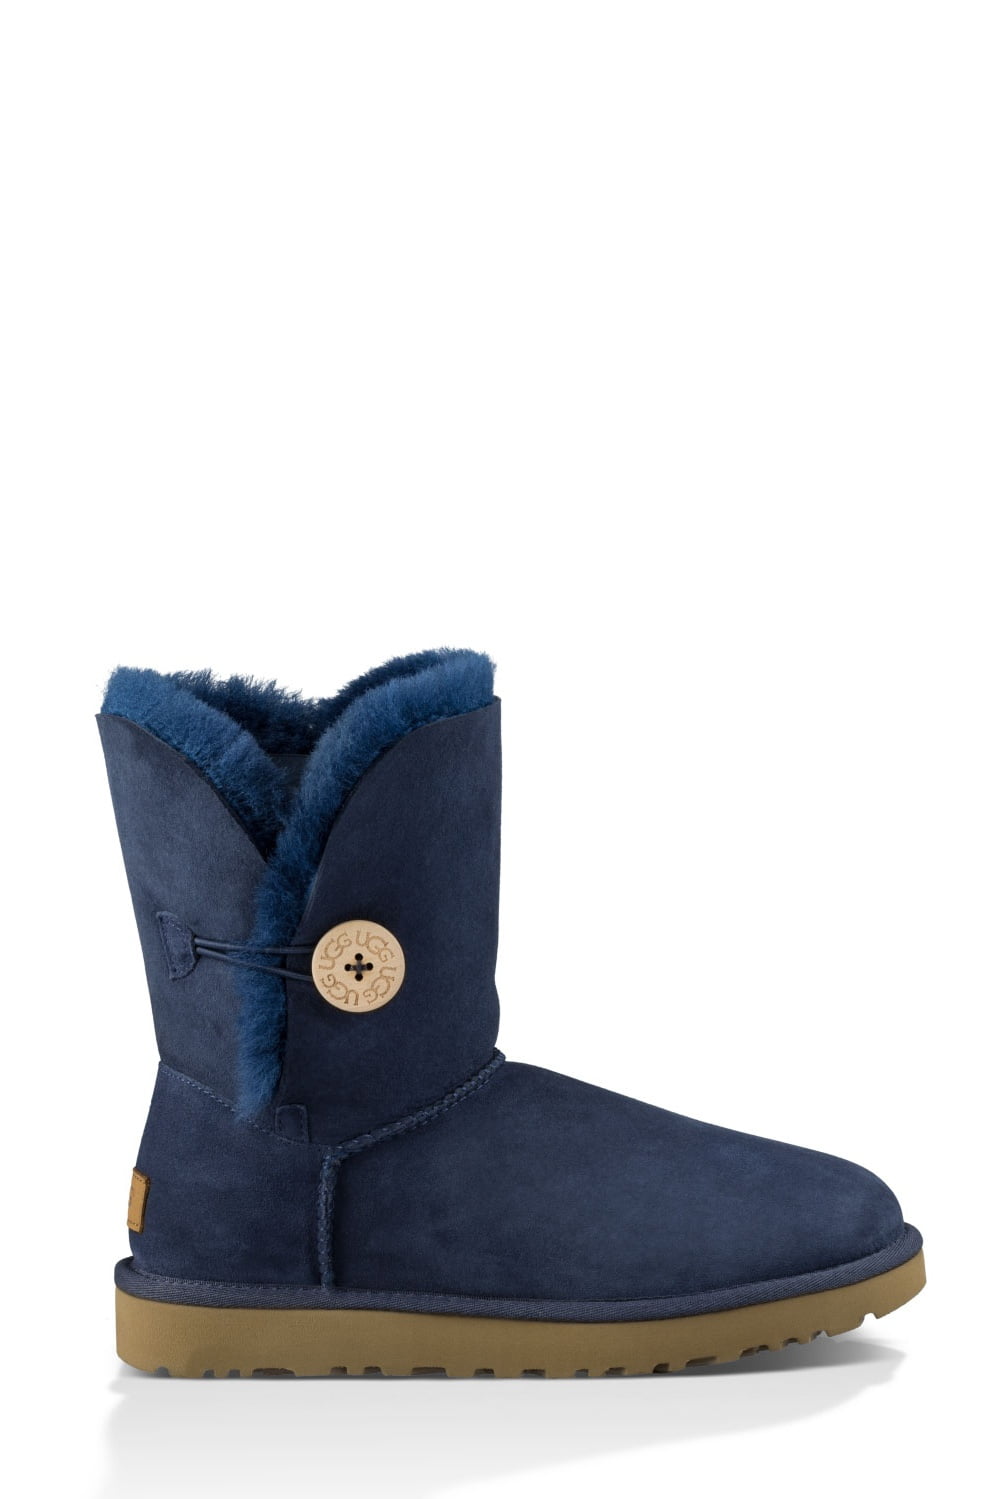 navy blue bailey button ugg boots